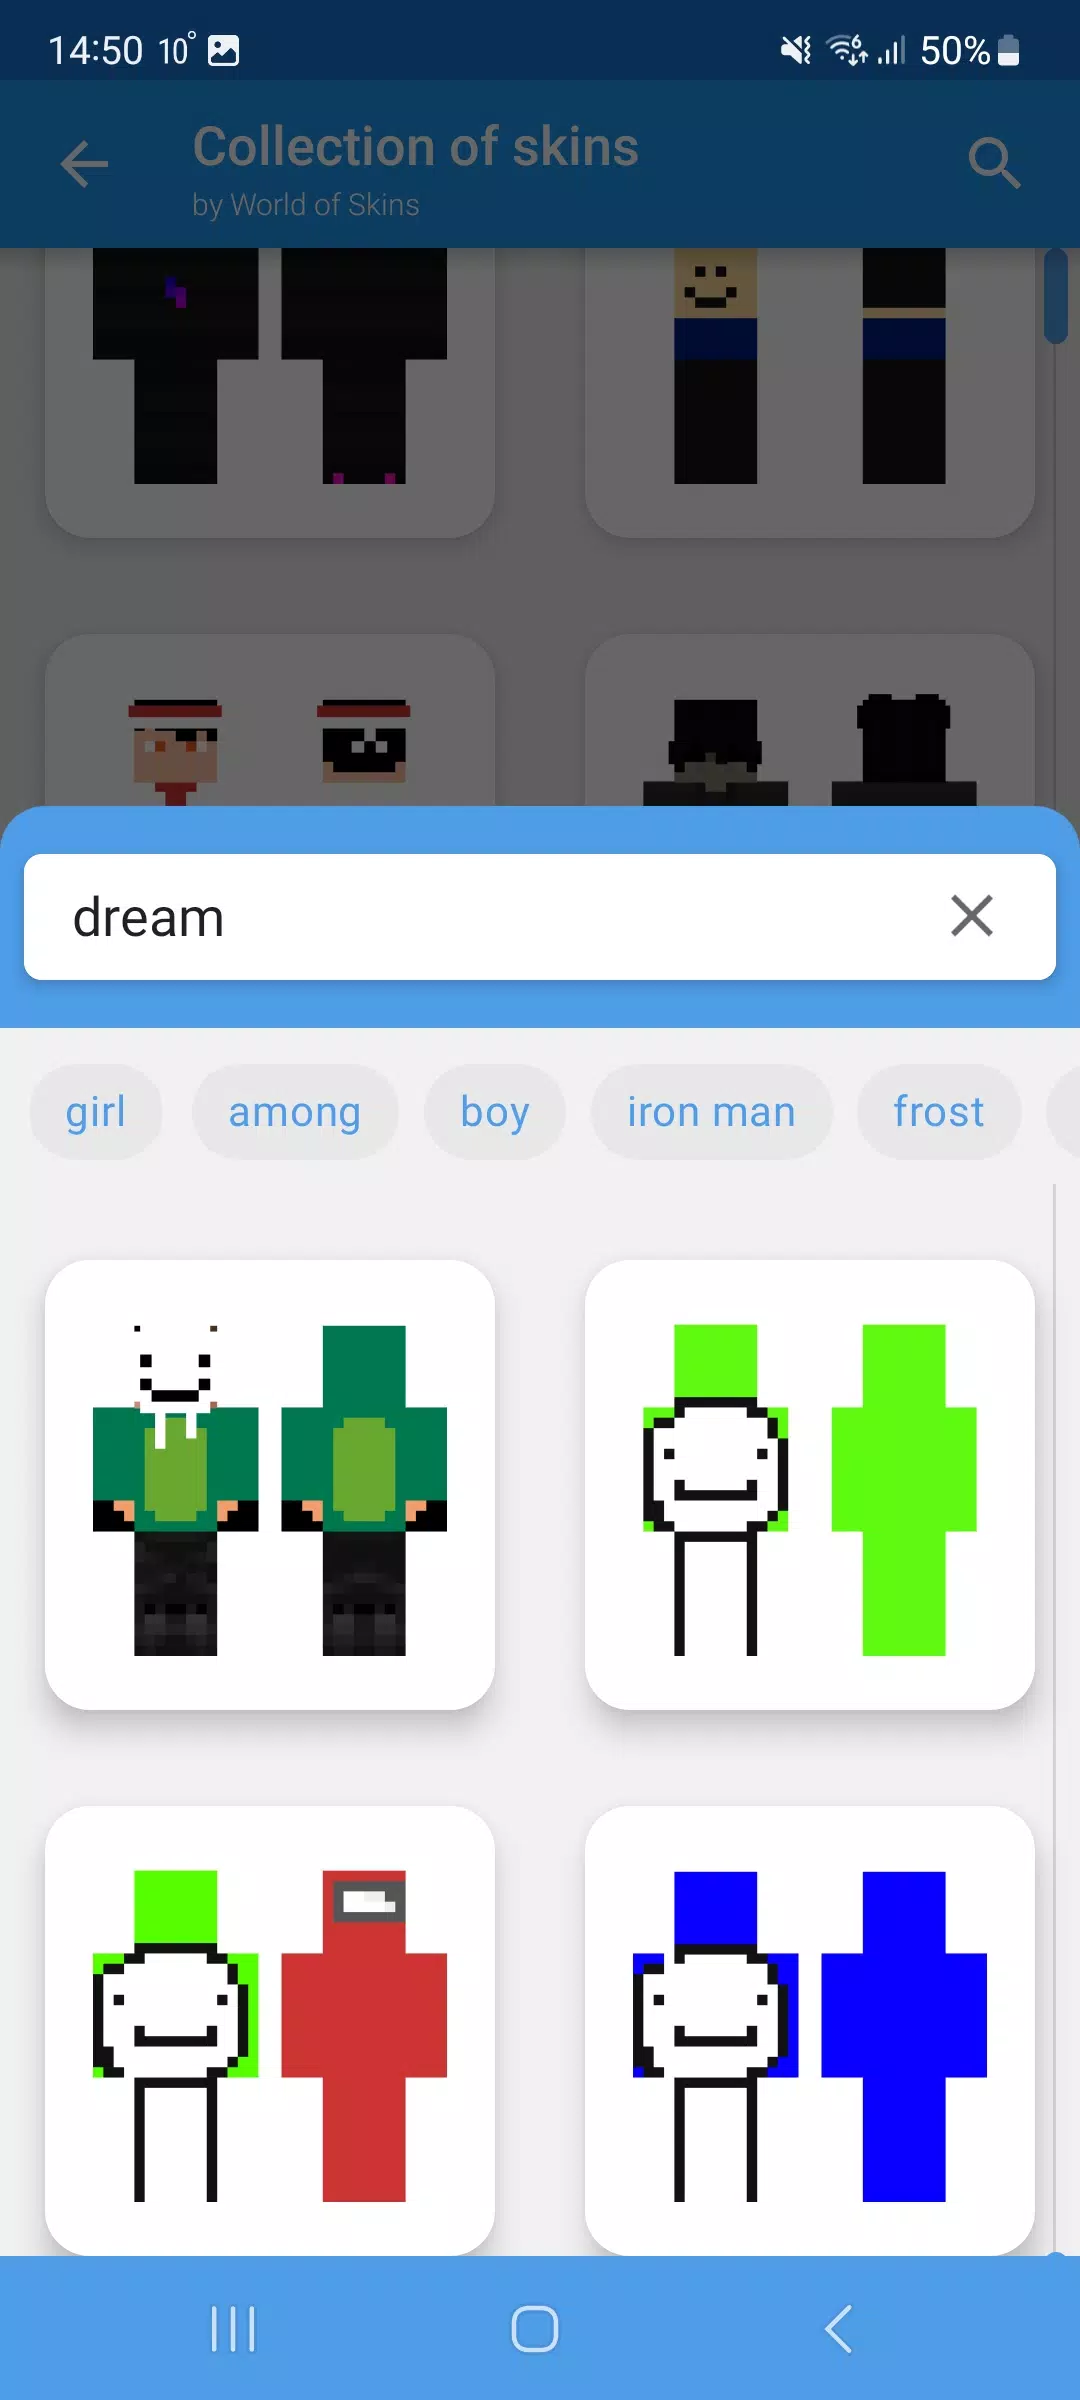 Skin Editor 3D for Minecraft APK Download 2023 - Free - 9Apps